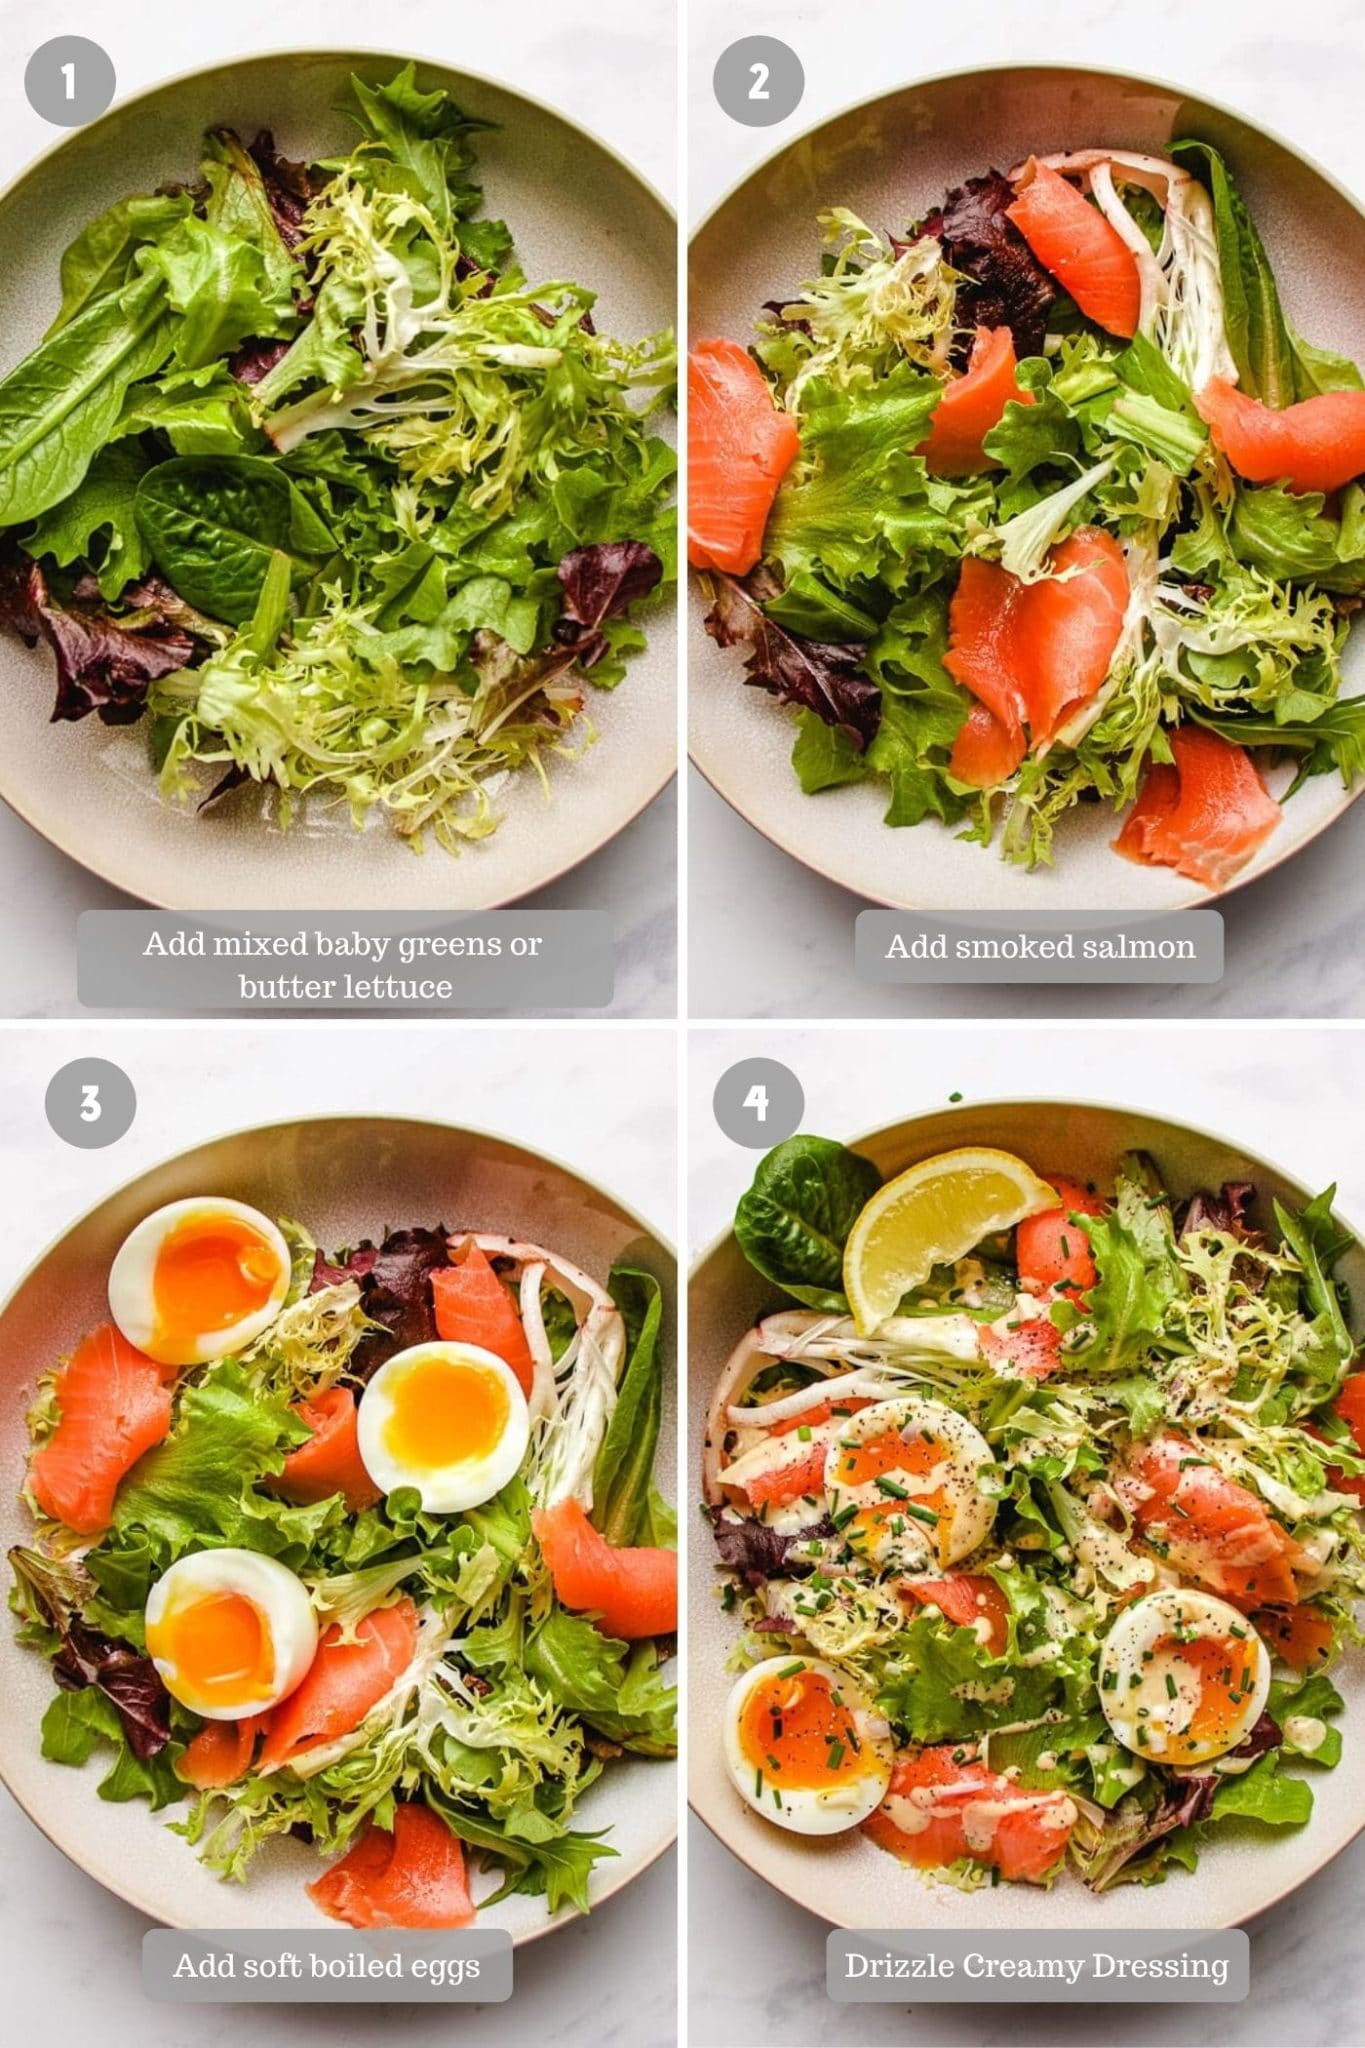 Person demos how to assemble smoked salmon salad in step-by-step photo instructions. 